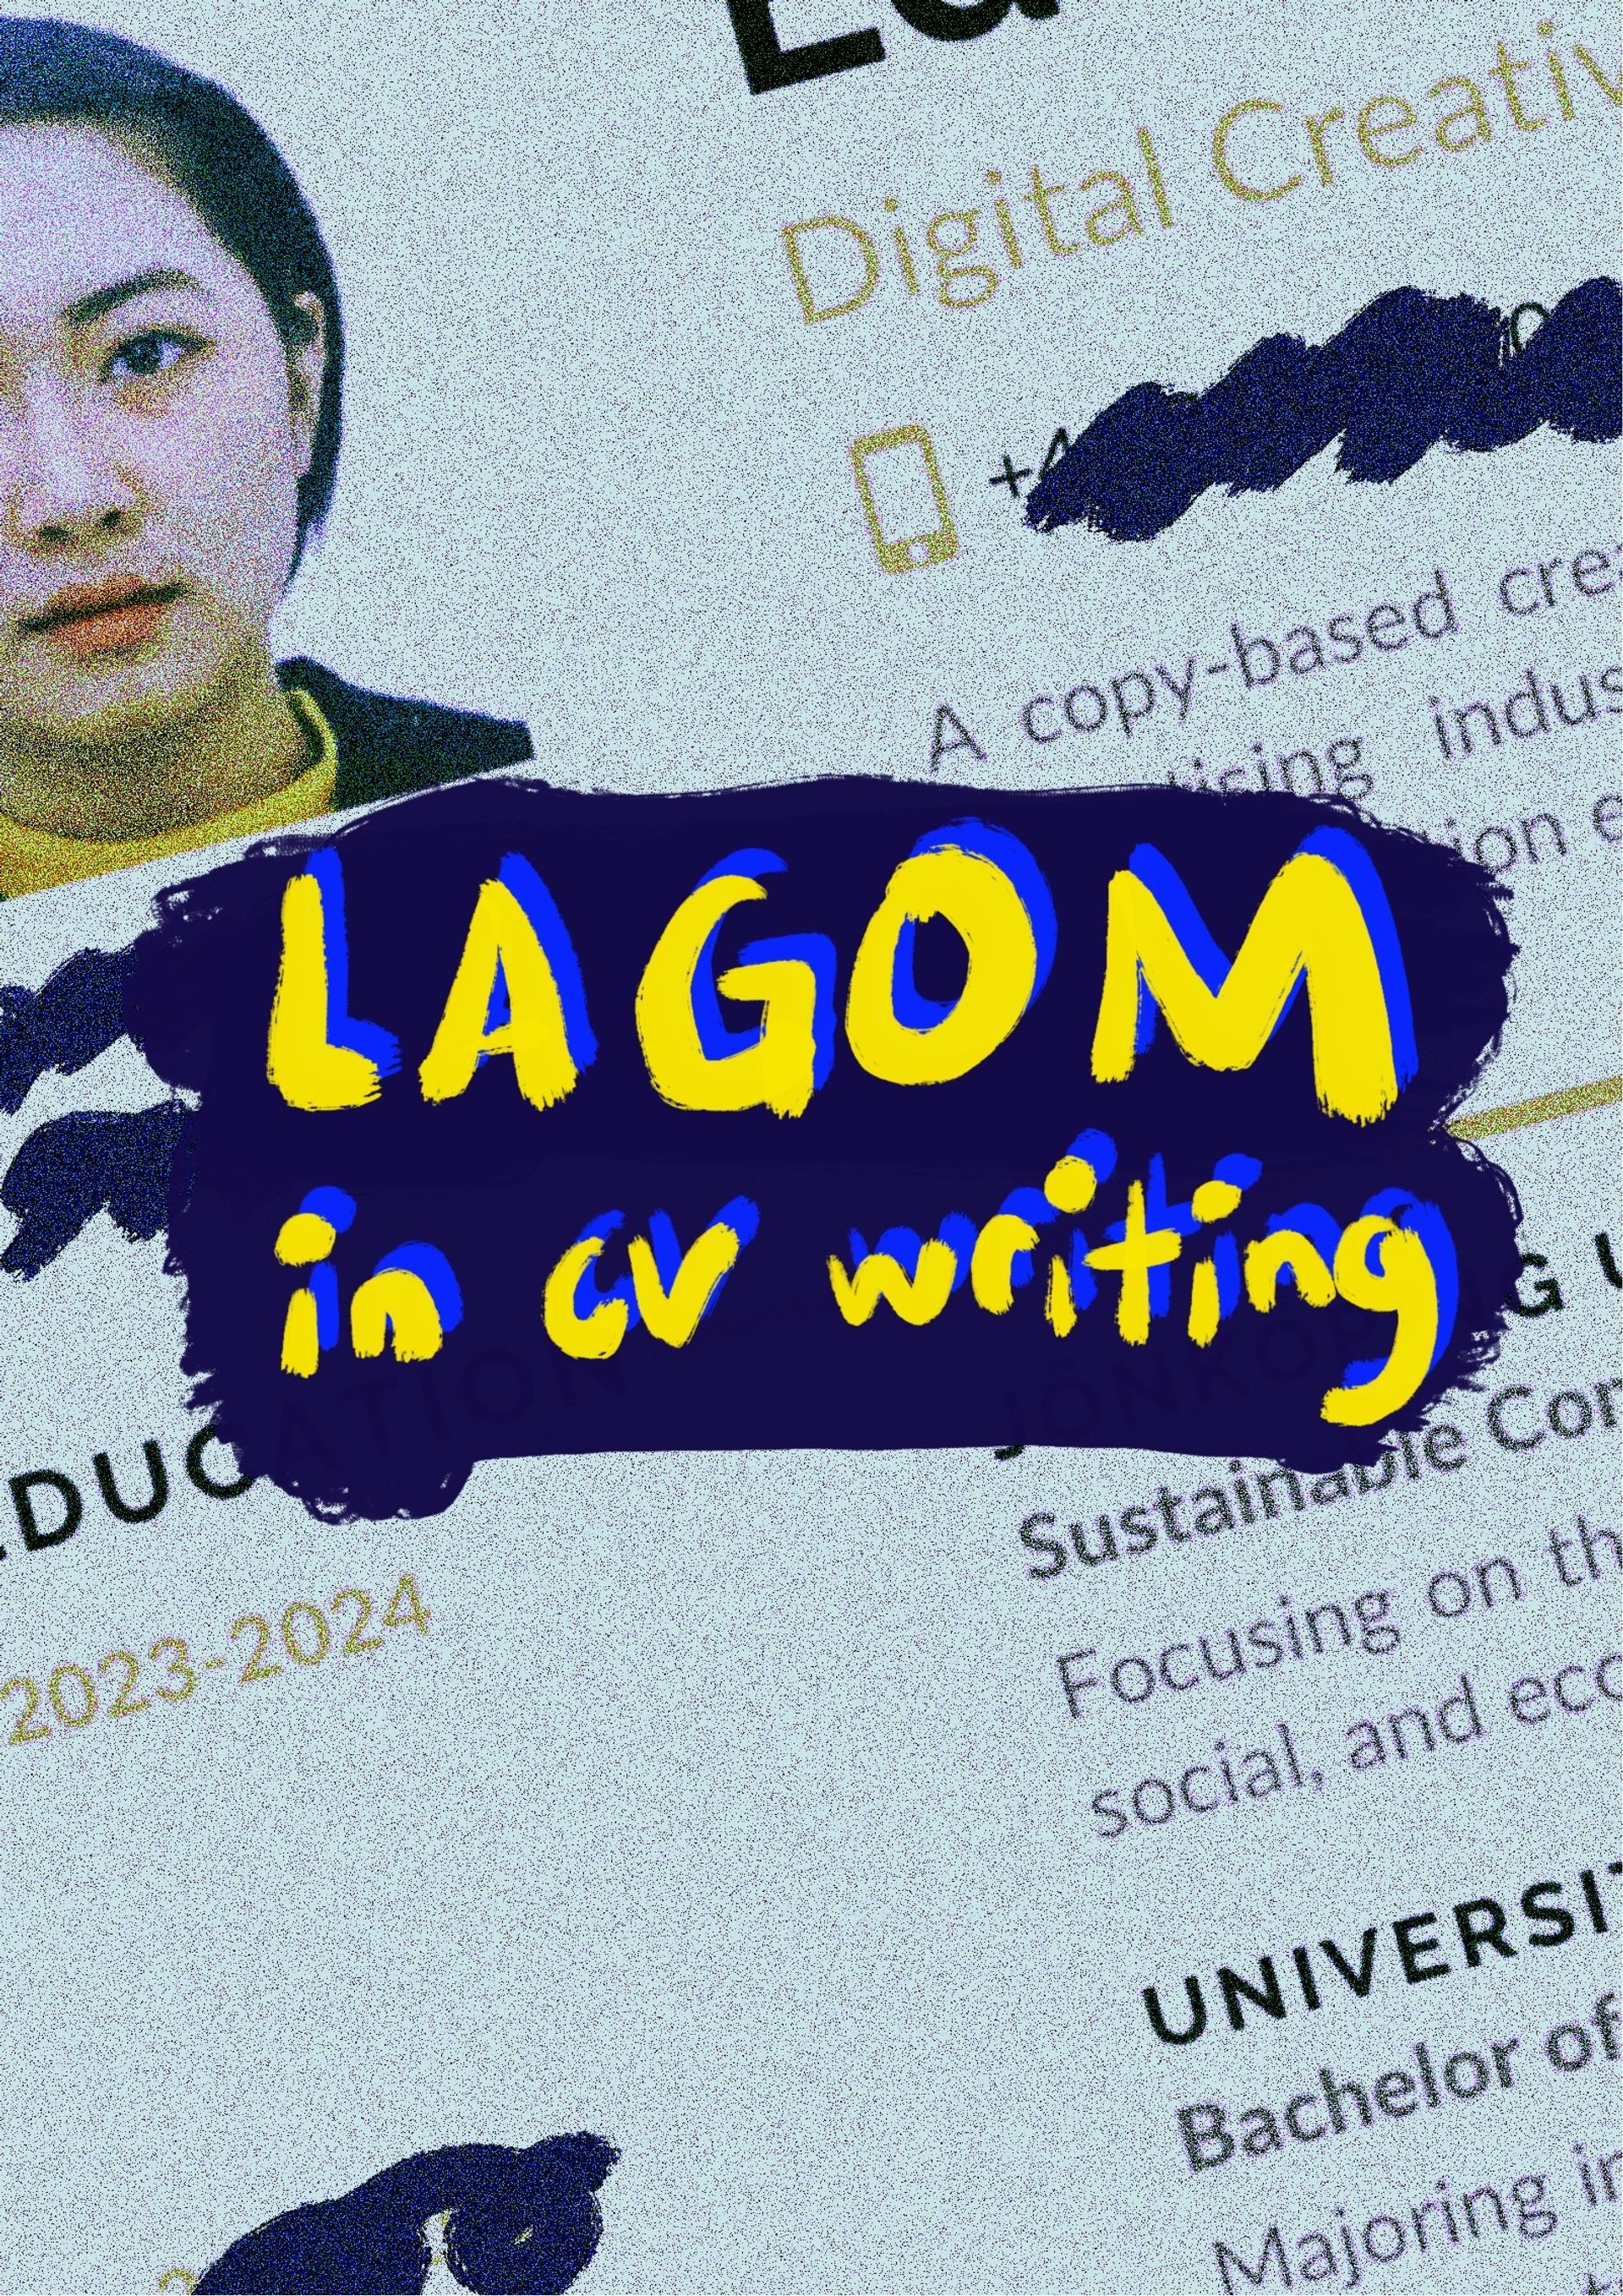 tips on how to write a good CV in Sweden, by infusing lagom concept